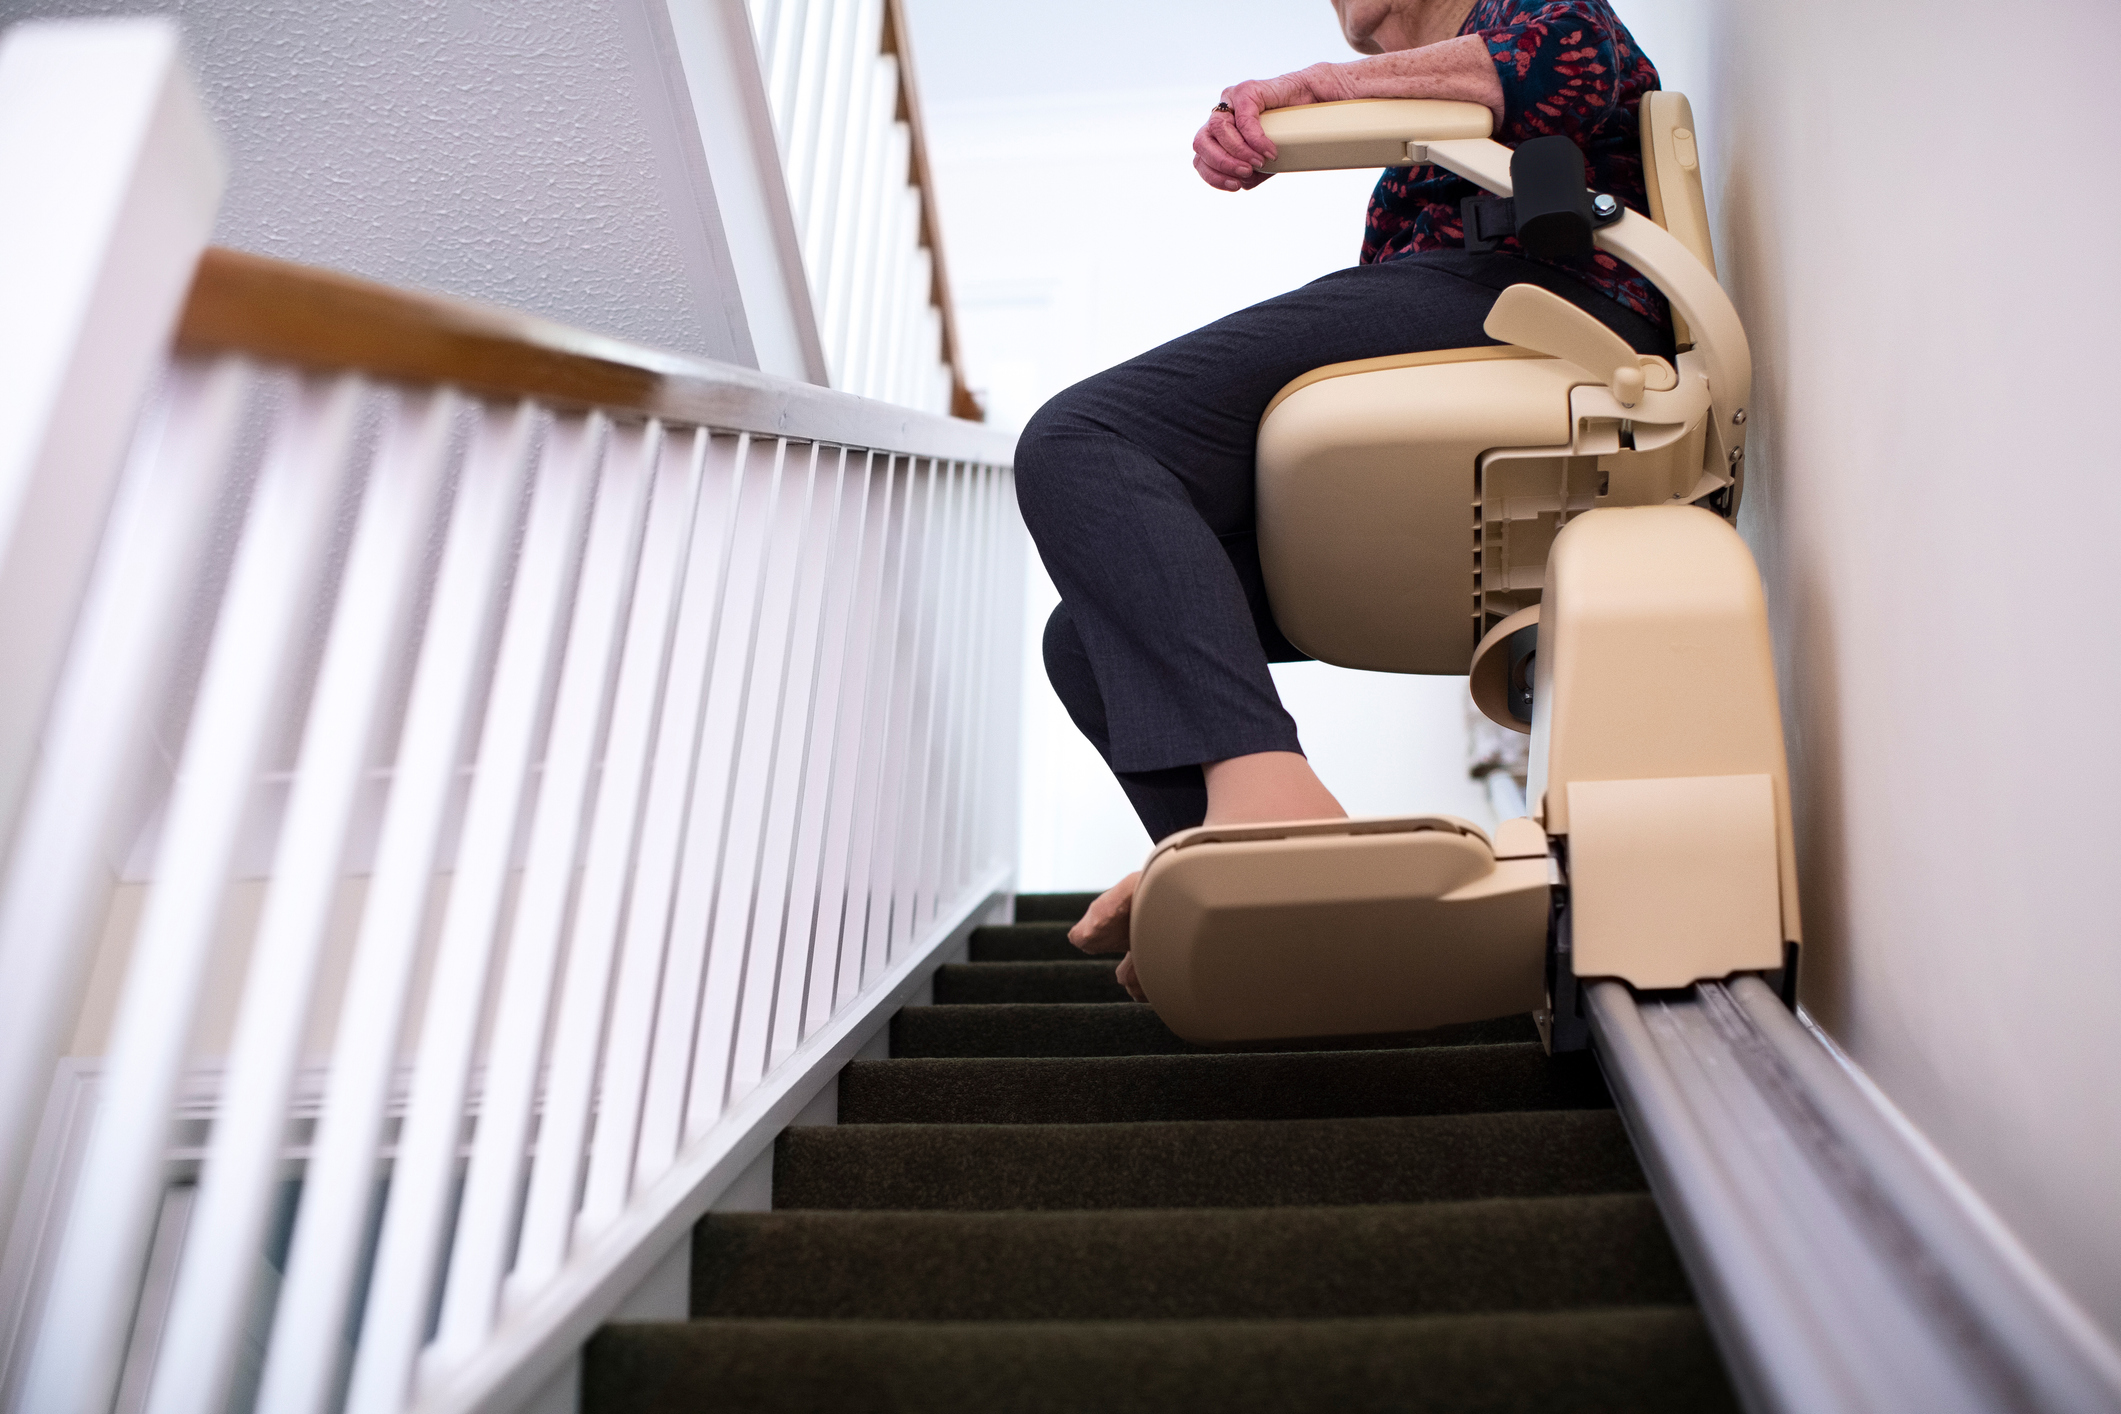 A woman uses a stair lift to get up her stairs